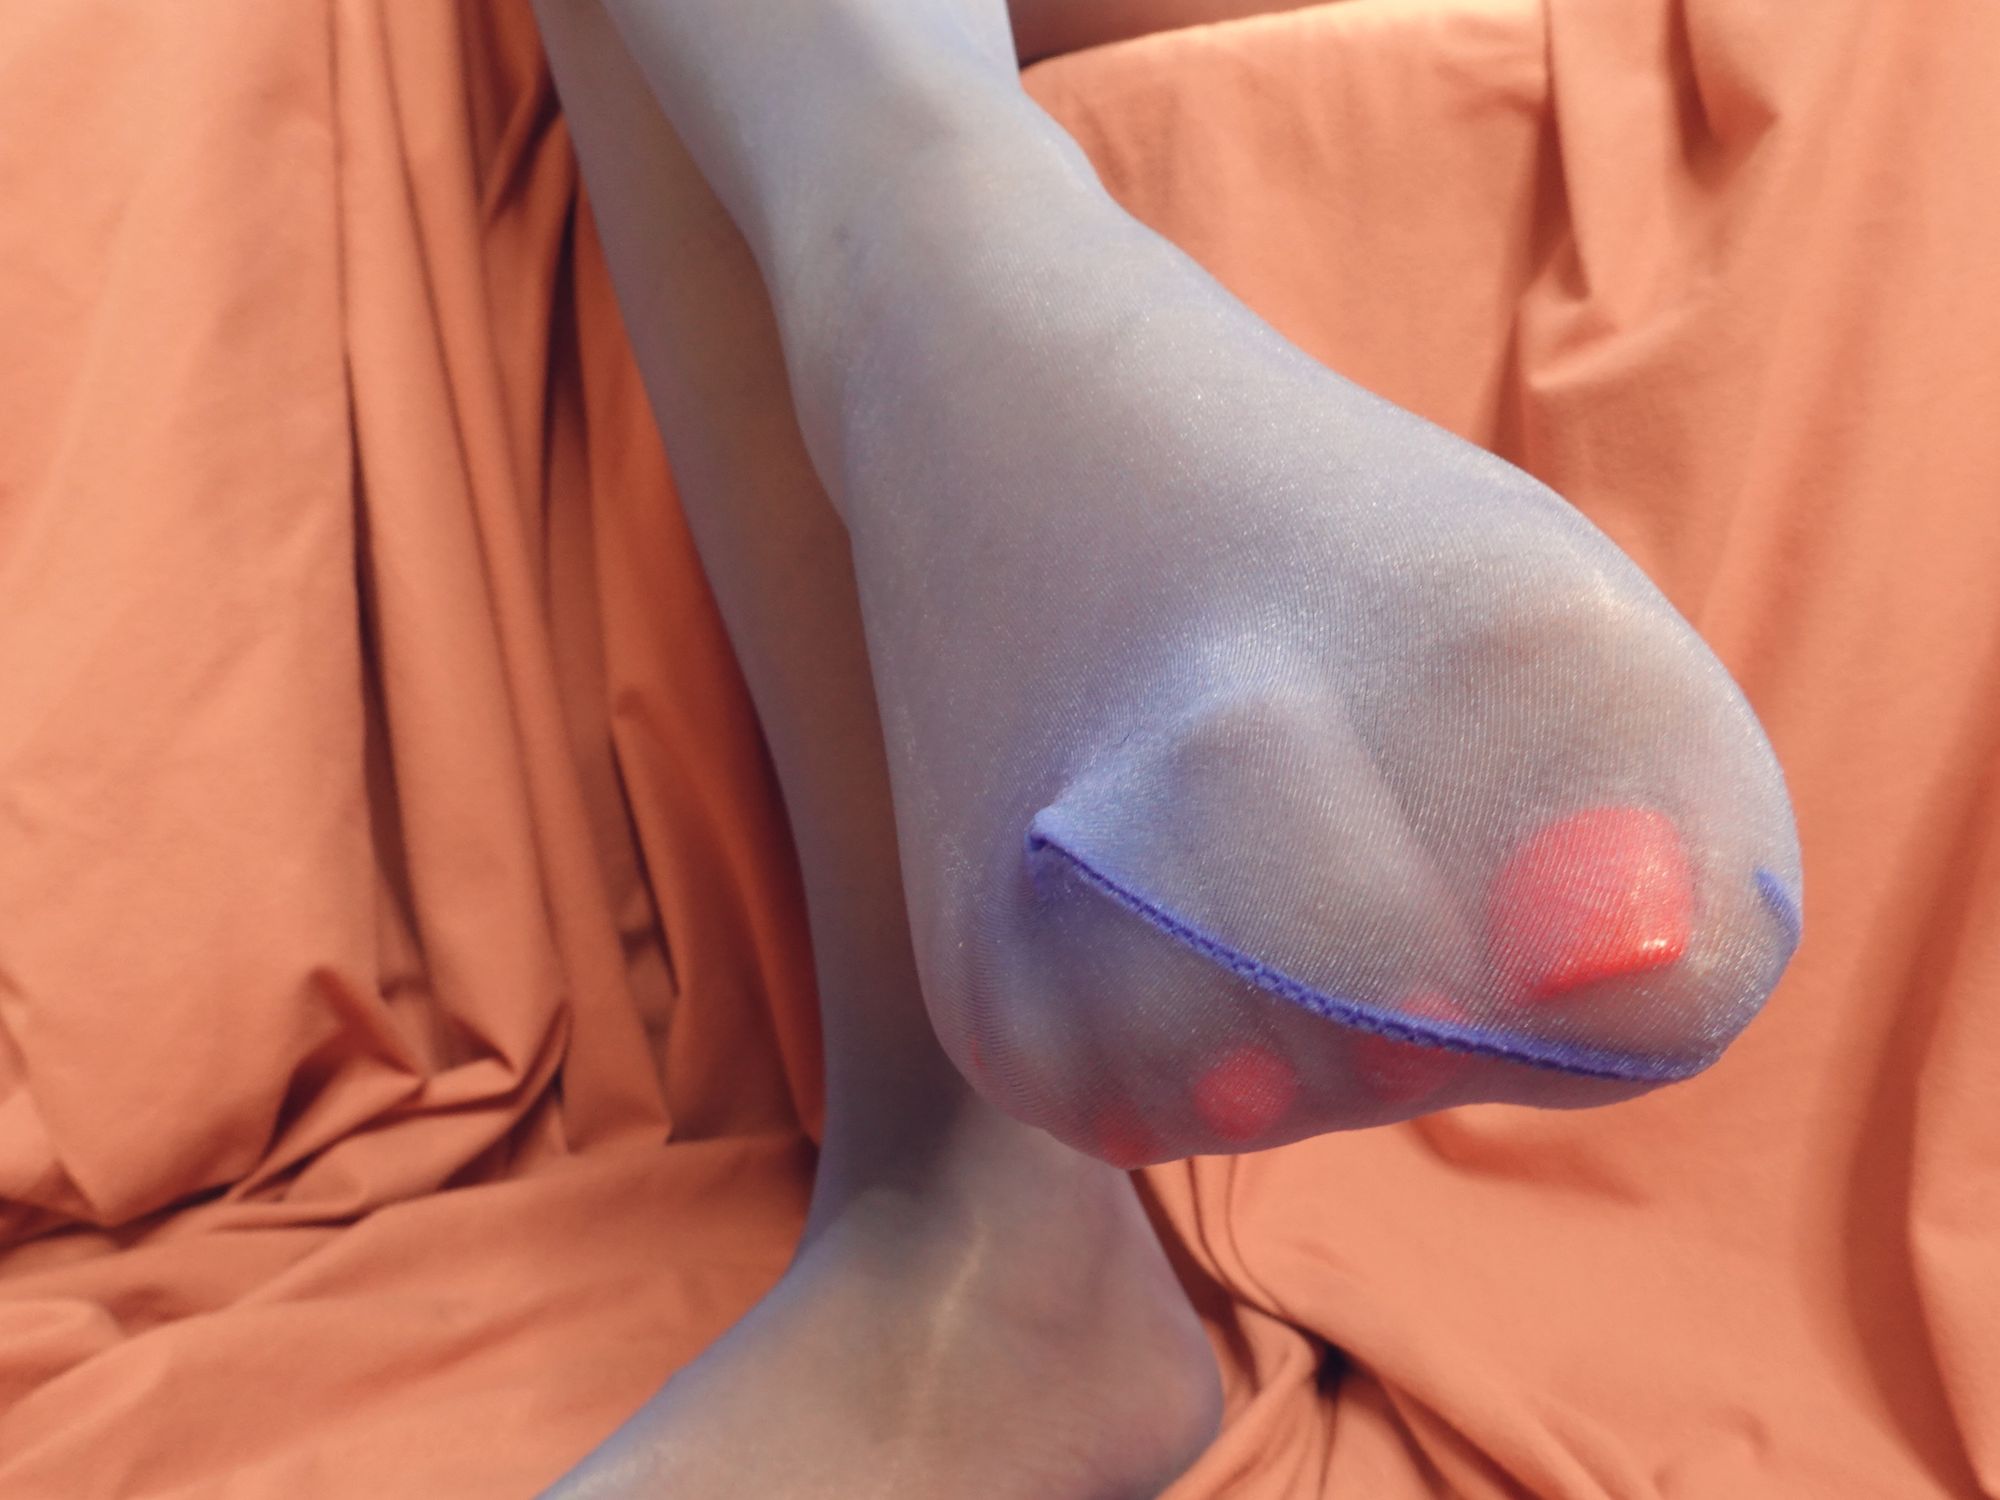 The wet look (electric blue nylons)